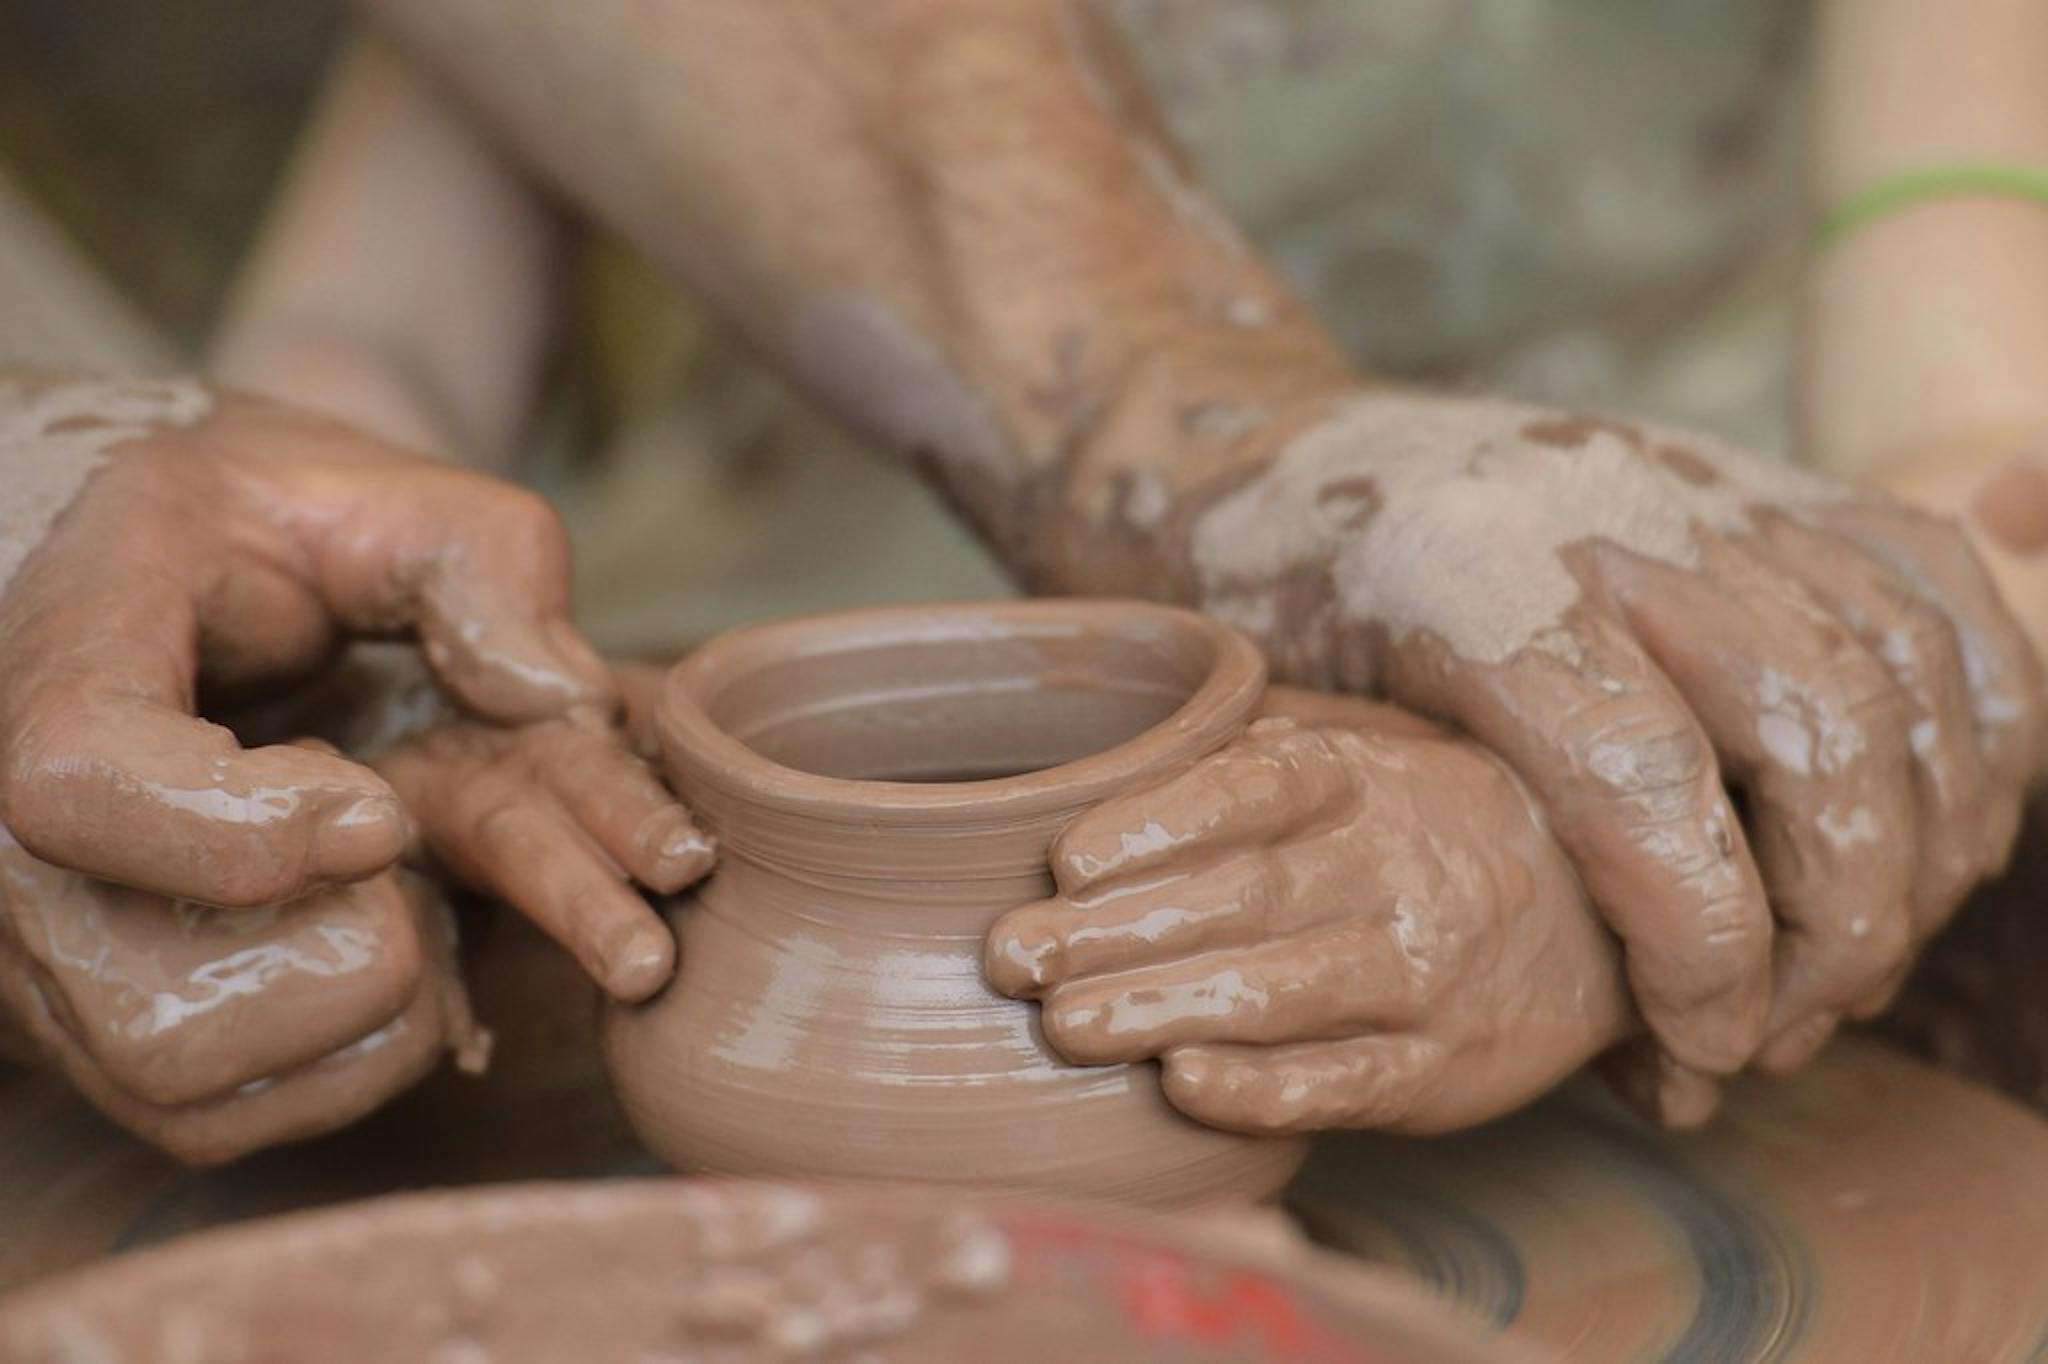 "Child's Hands in Clay" by diana_robinson is marked with CC BY-NC-ND 2.0.